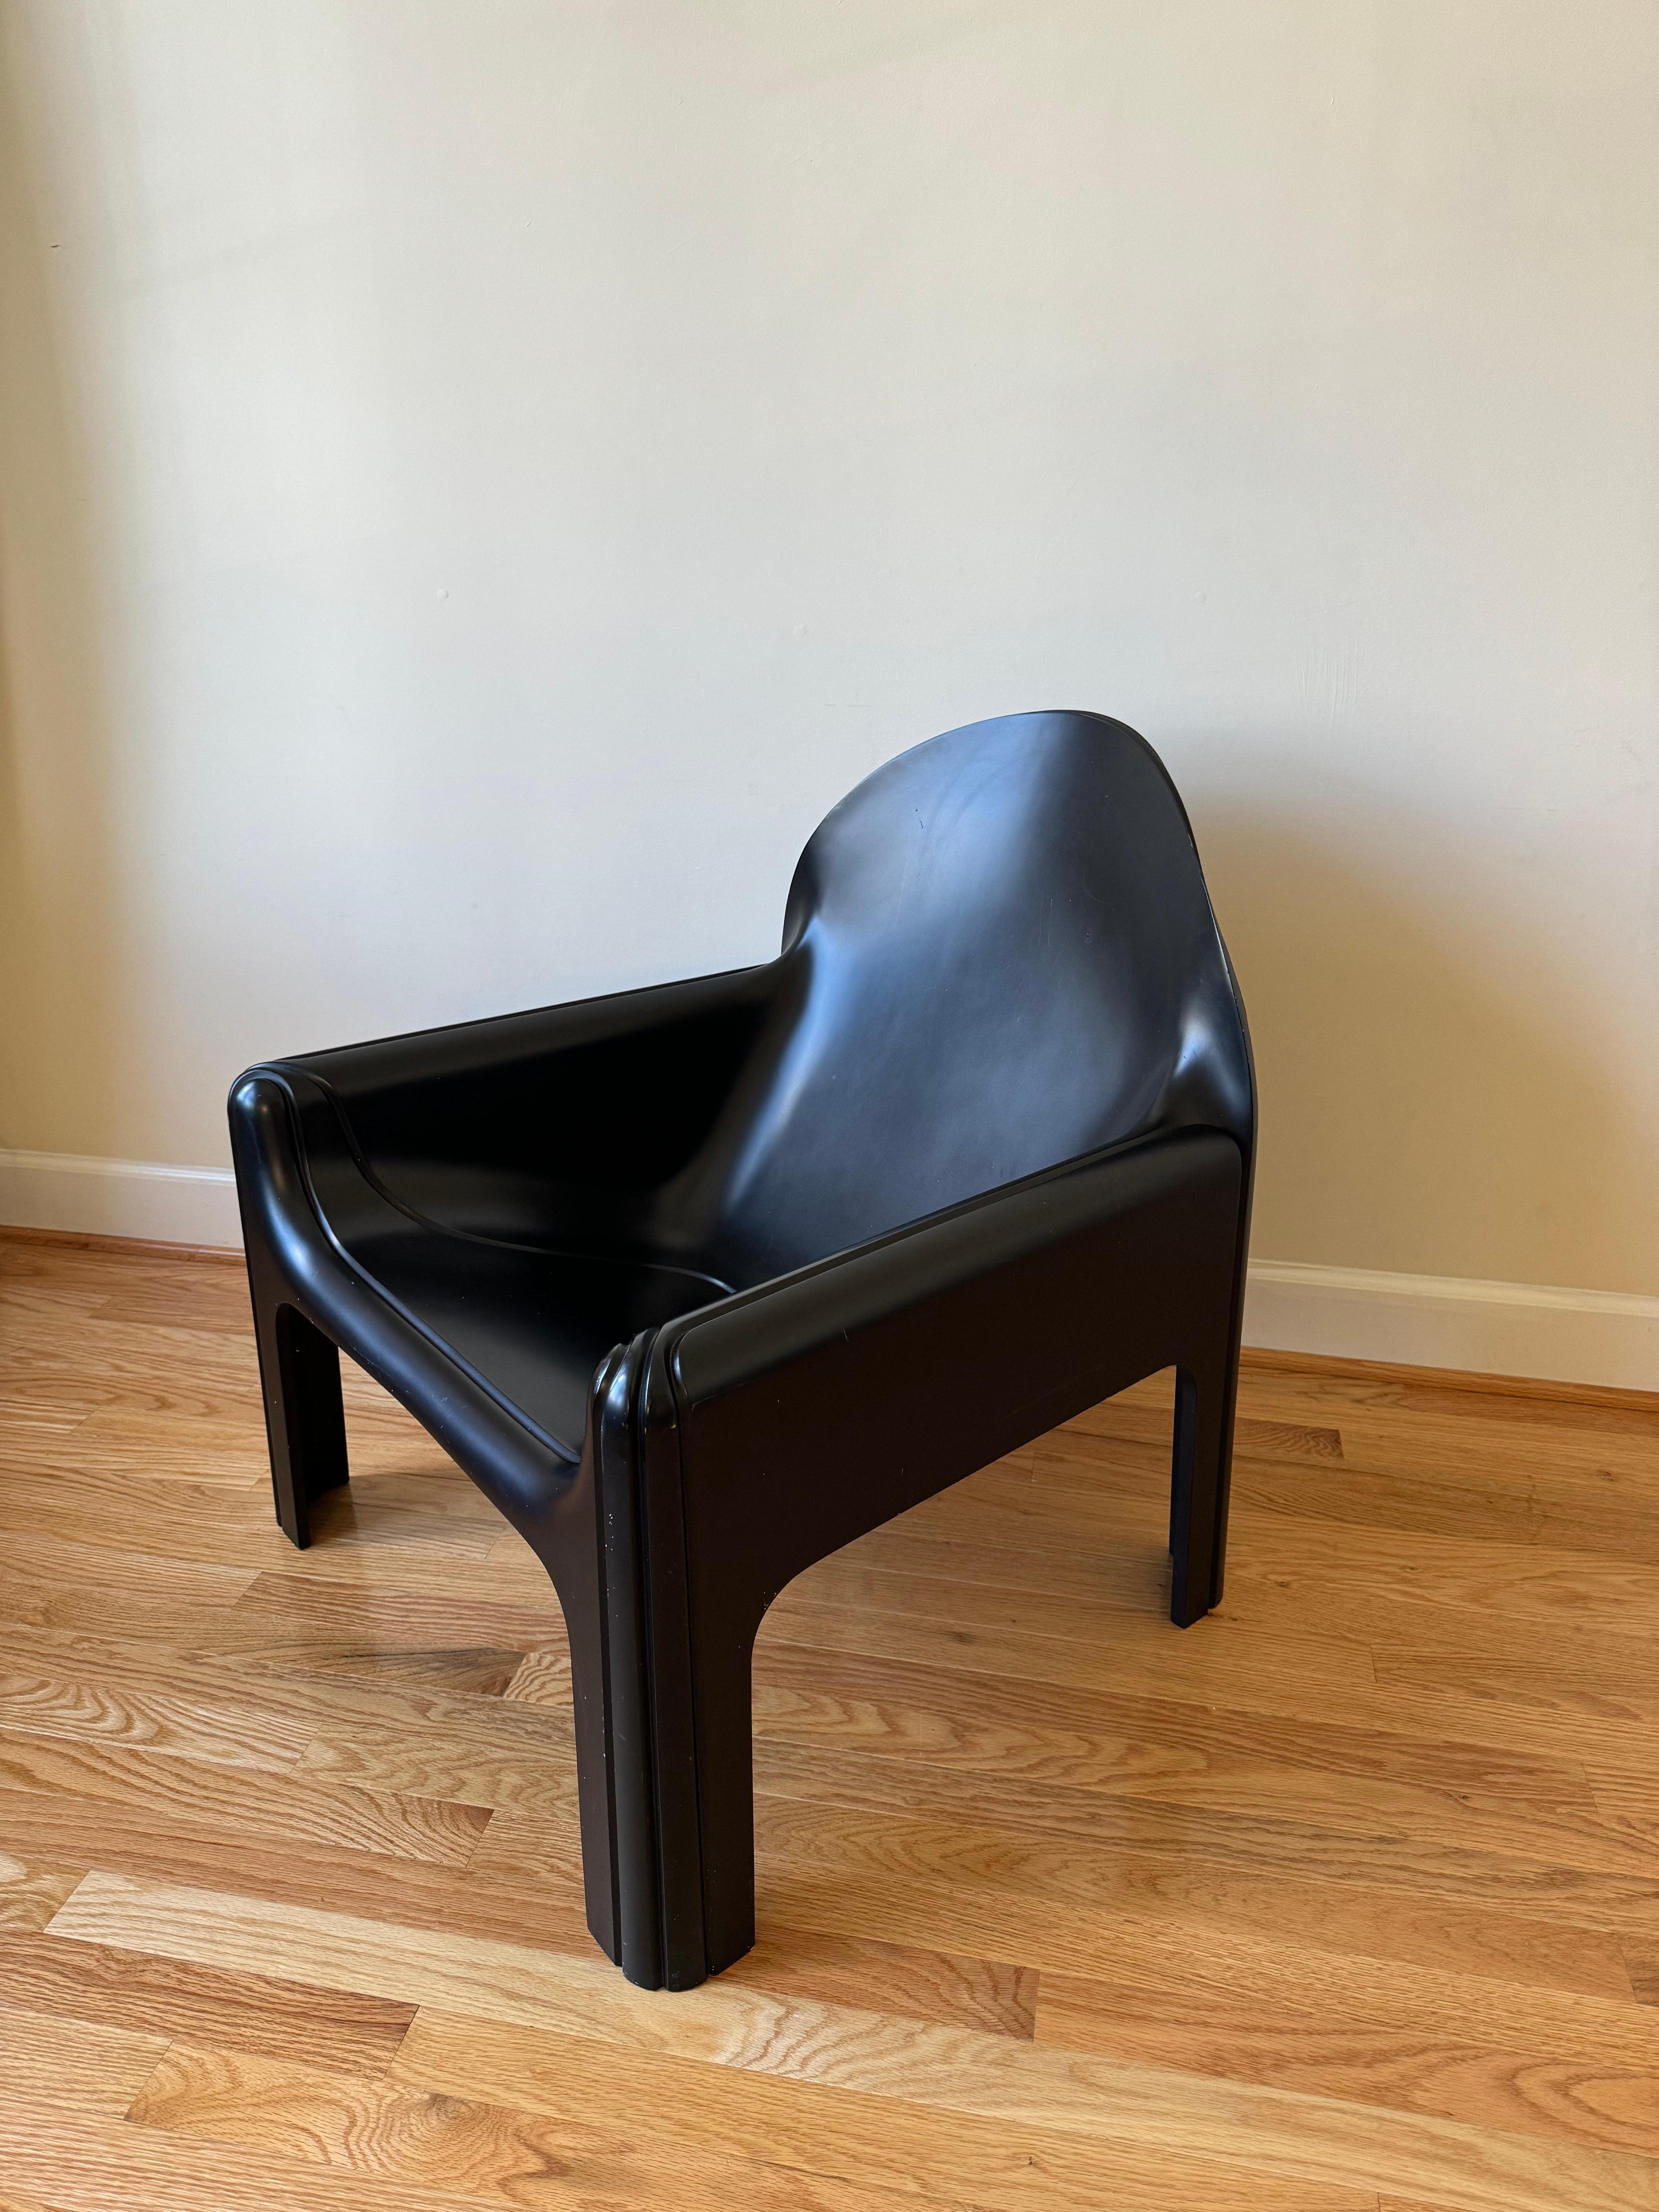 Armchair model 4794 by Gae Aulenti for Kartell In Good Condition For Sale In Centreville, VA